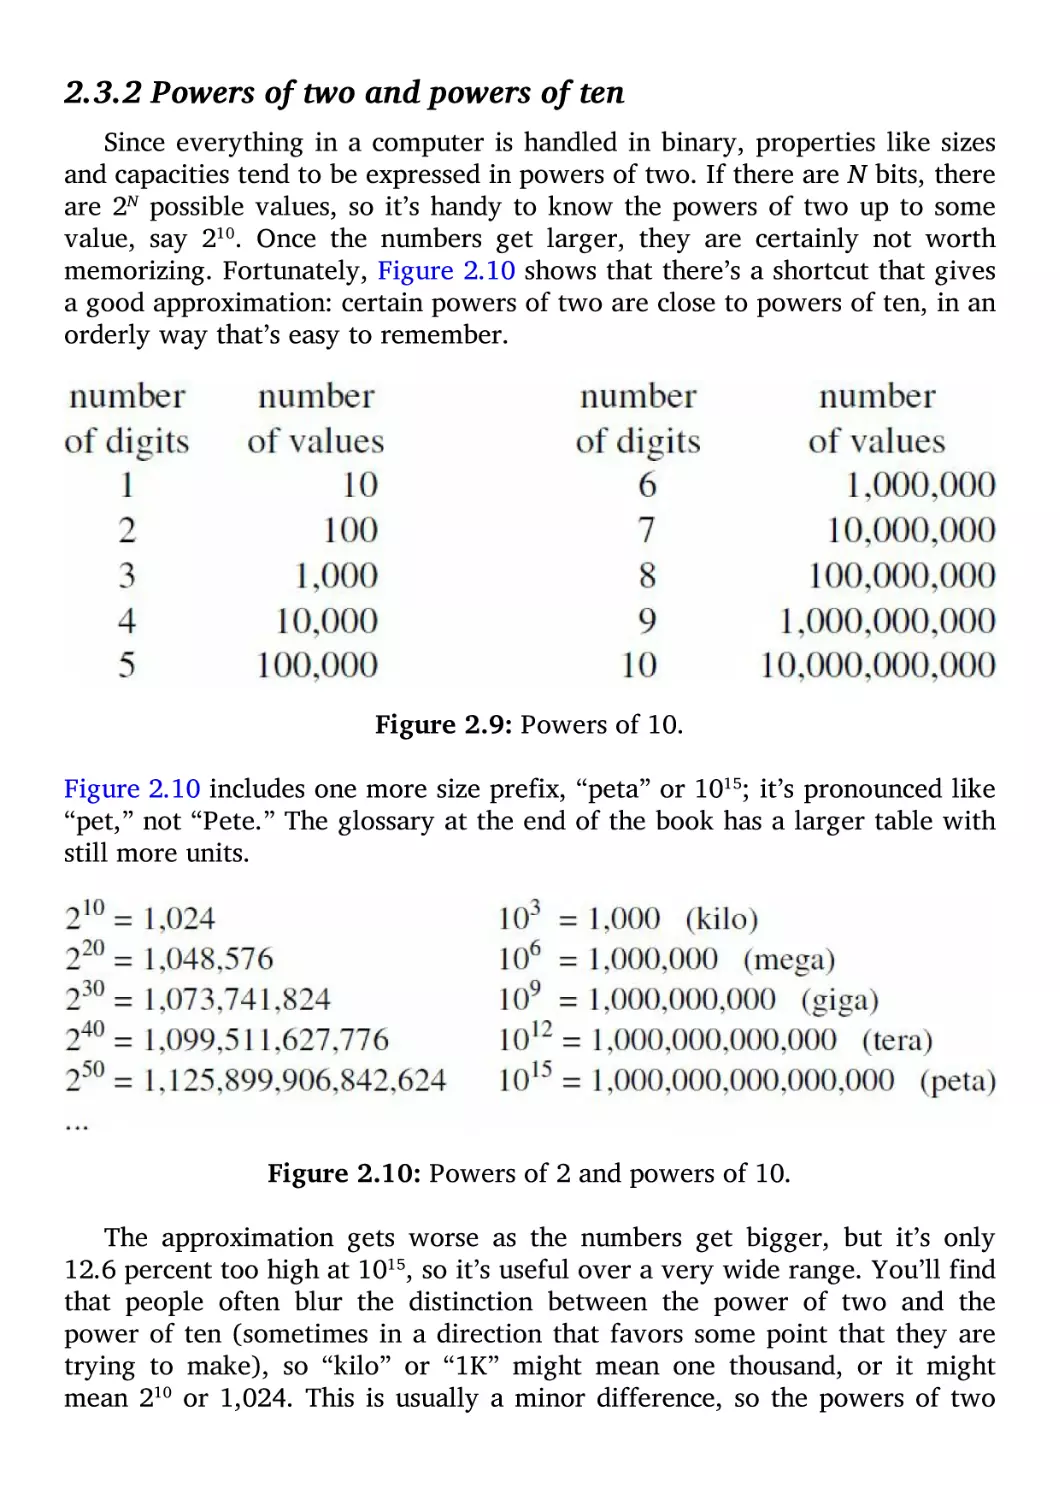 2.3.2 Powers of two and powers of ten